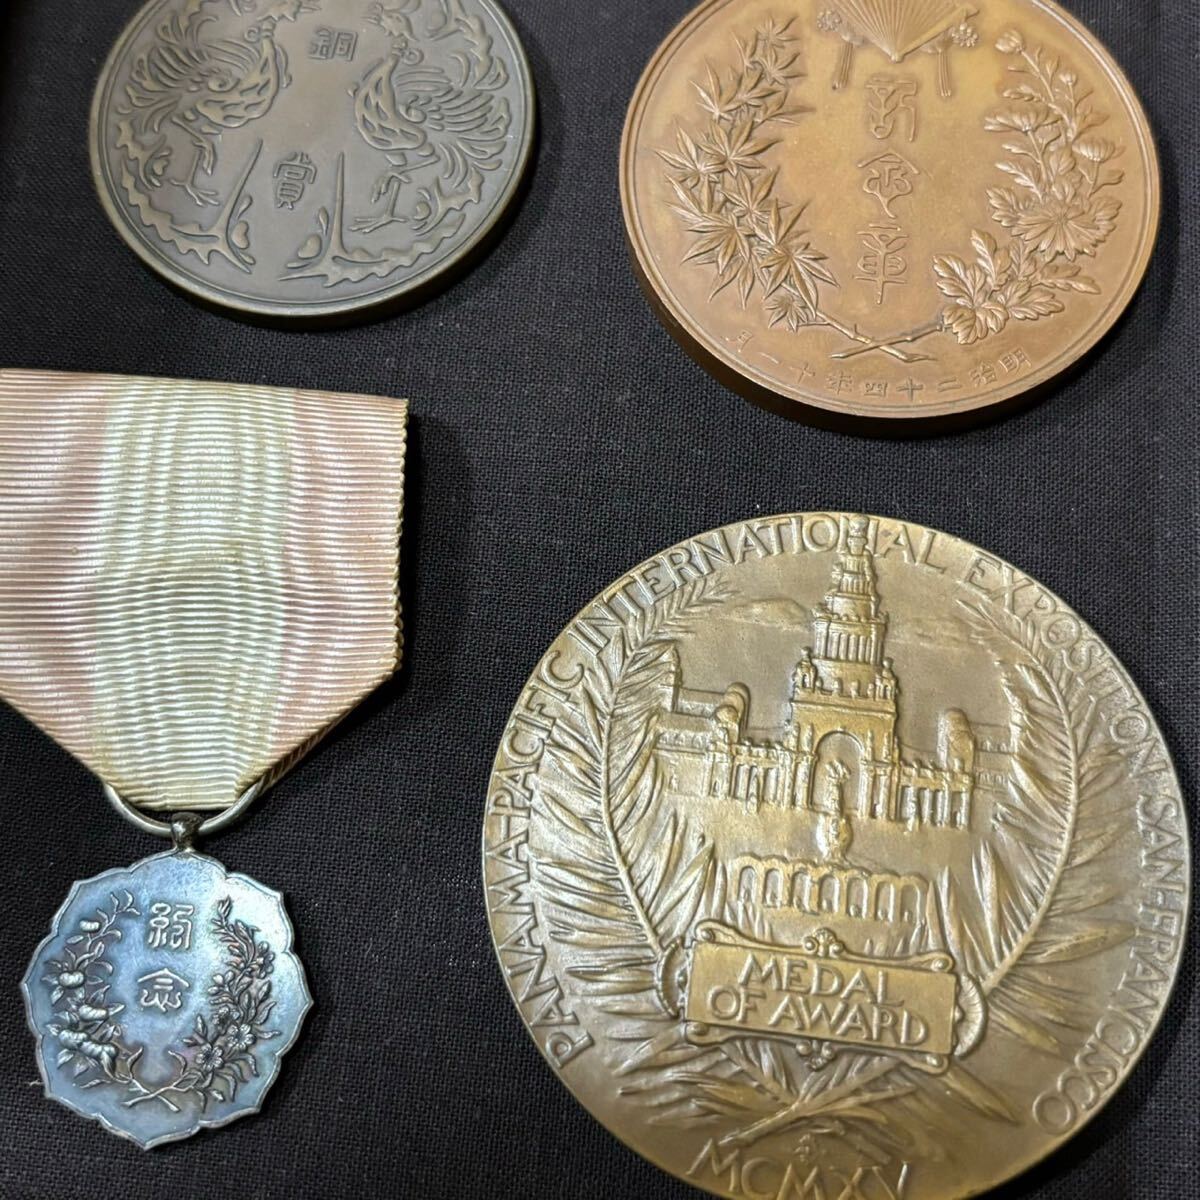 38 rare * memory medal order 10 pieces set copper medal Meiji era commemorative coin gold . prohibitation memory ... male . Inoue ...[ postage exhibitior charge *1 jpy start ]